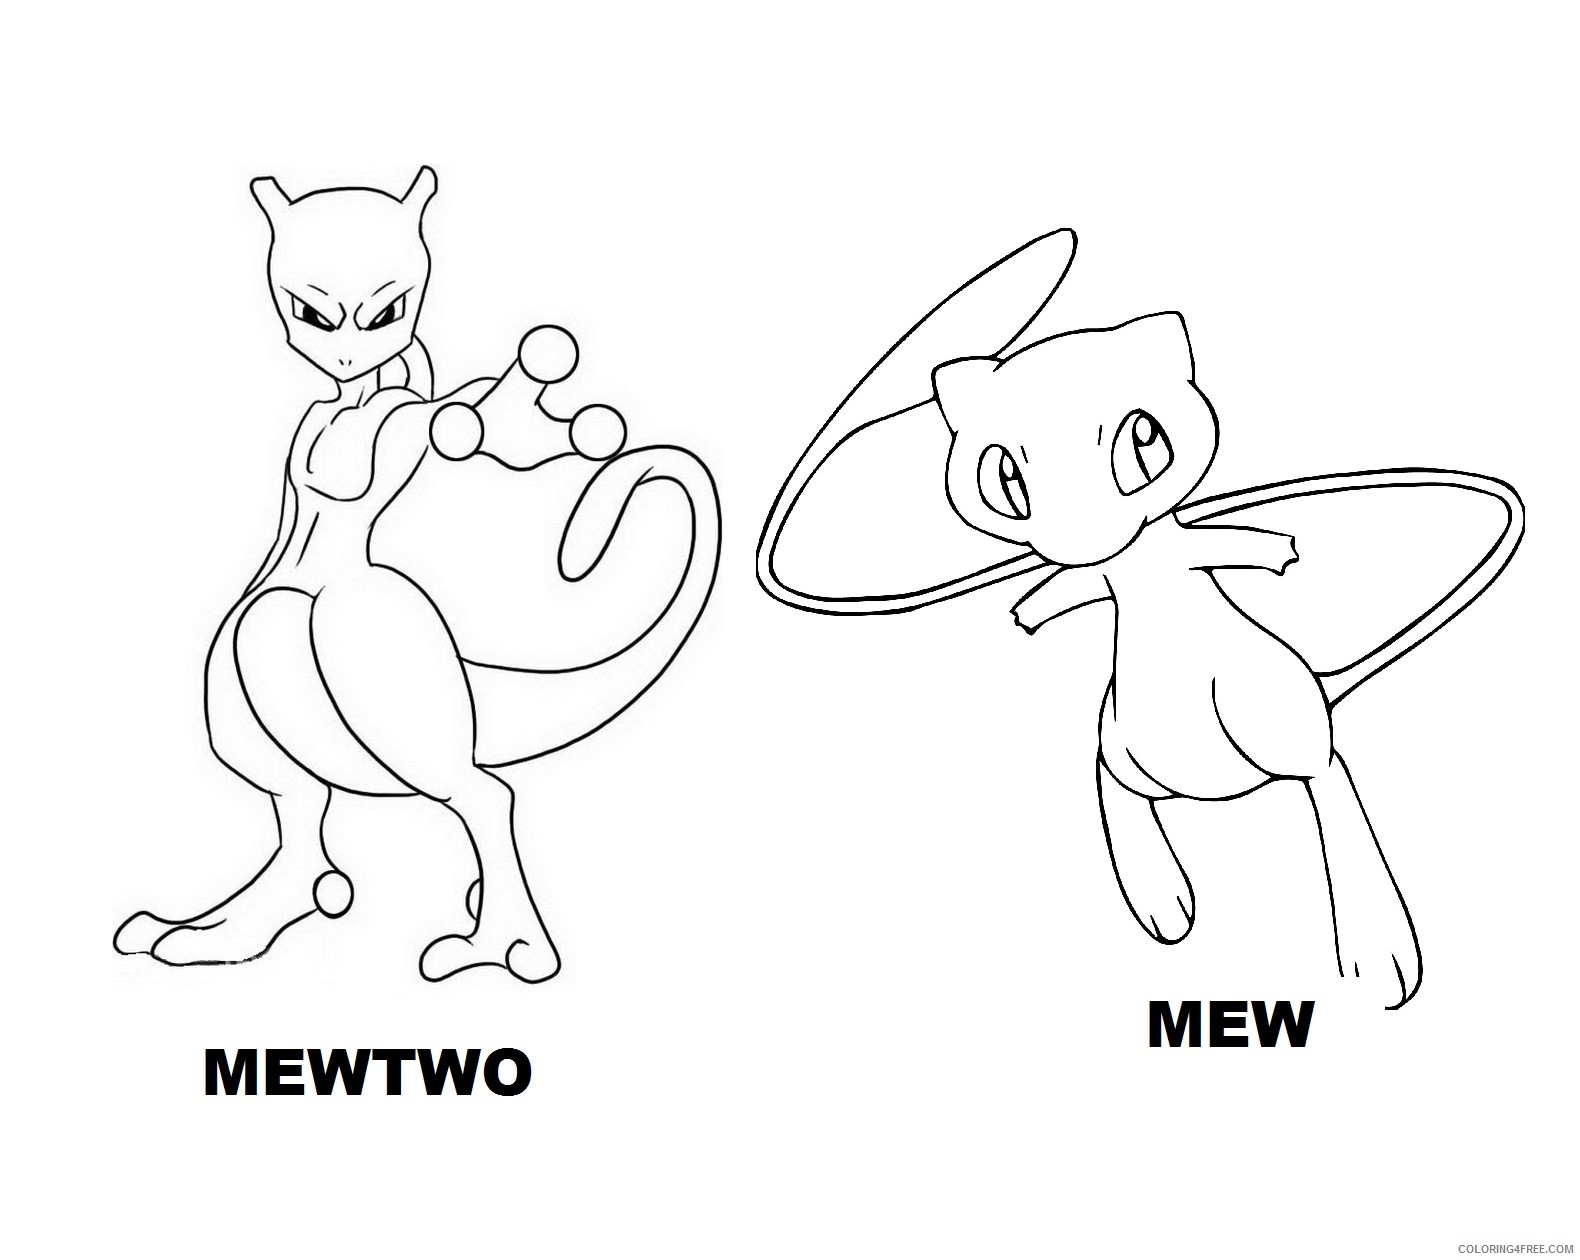 legendary pokemon coloring pages mewtwo and mew Coloring4free